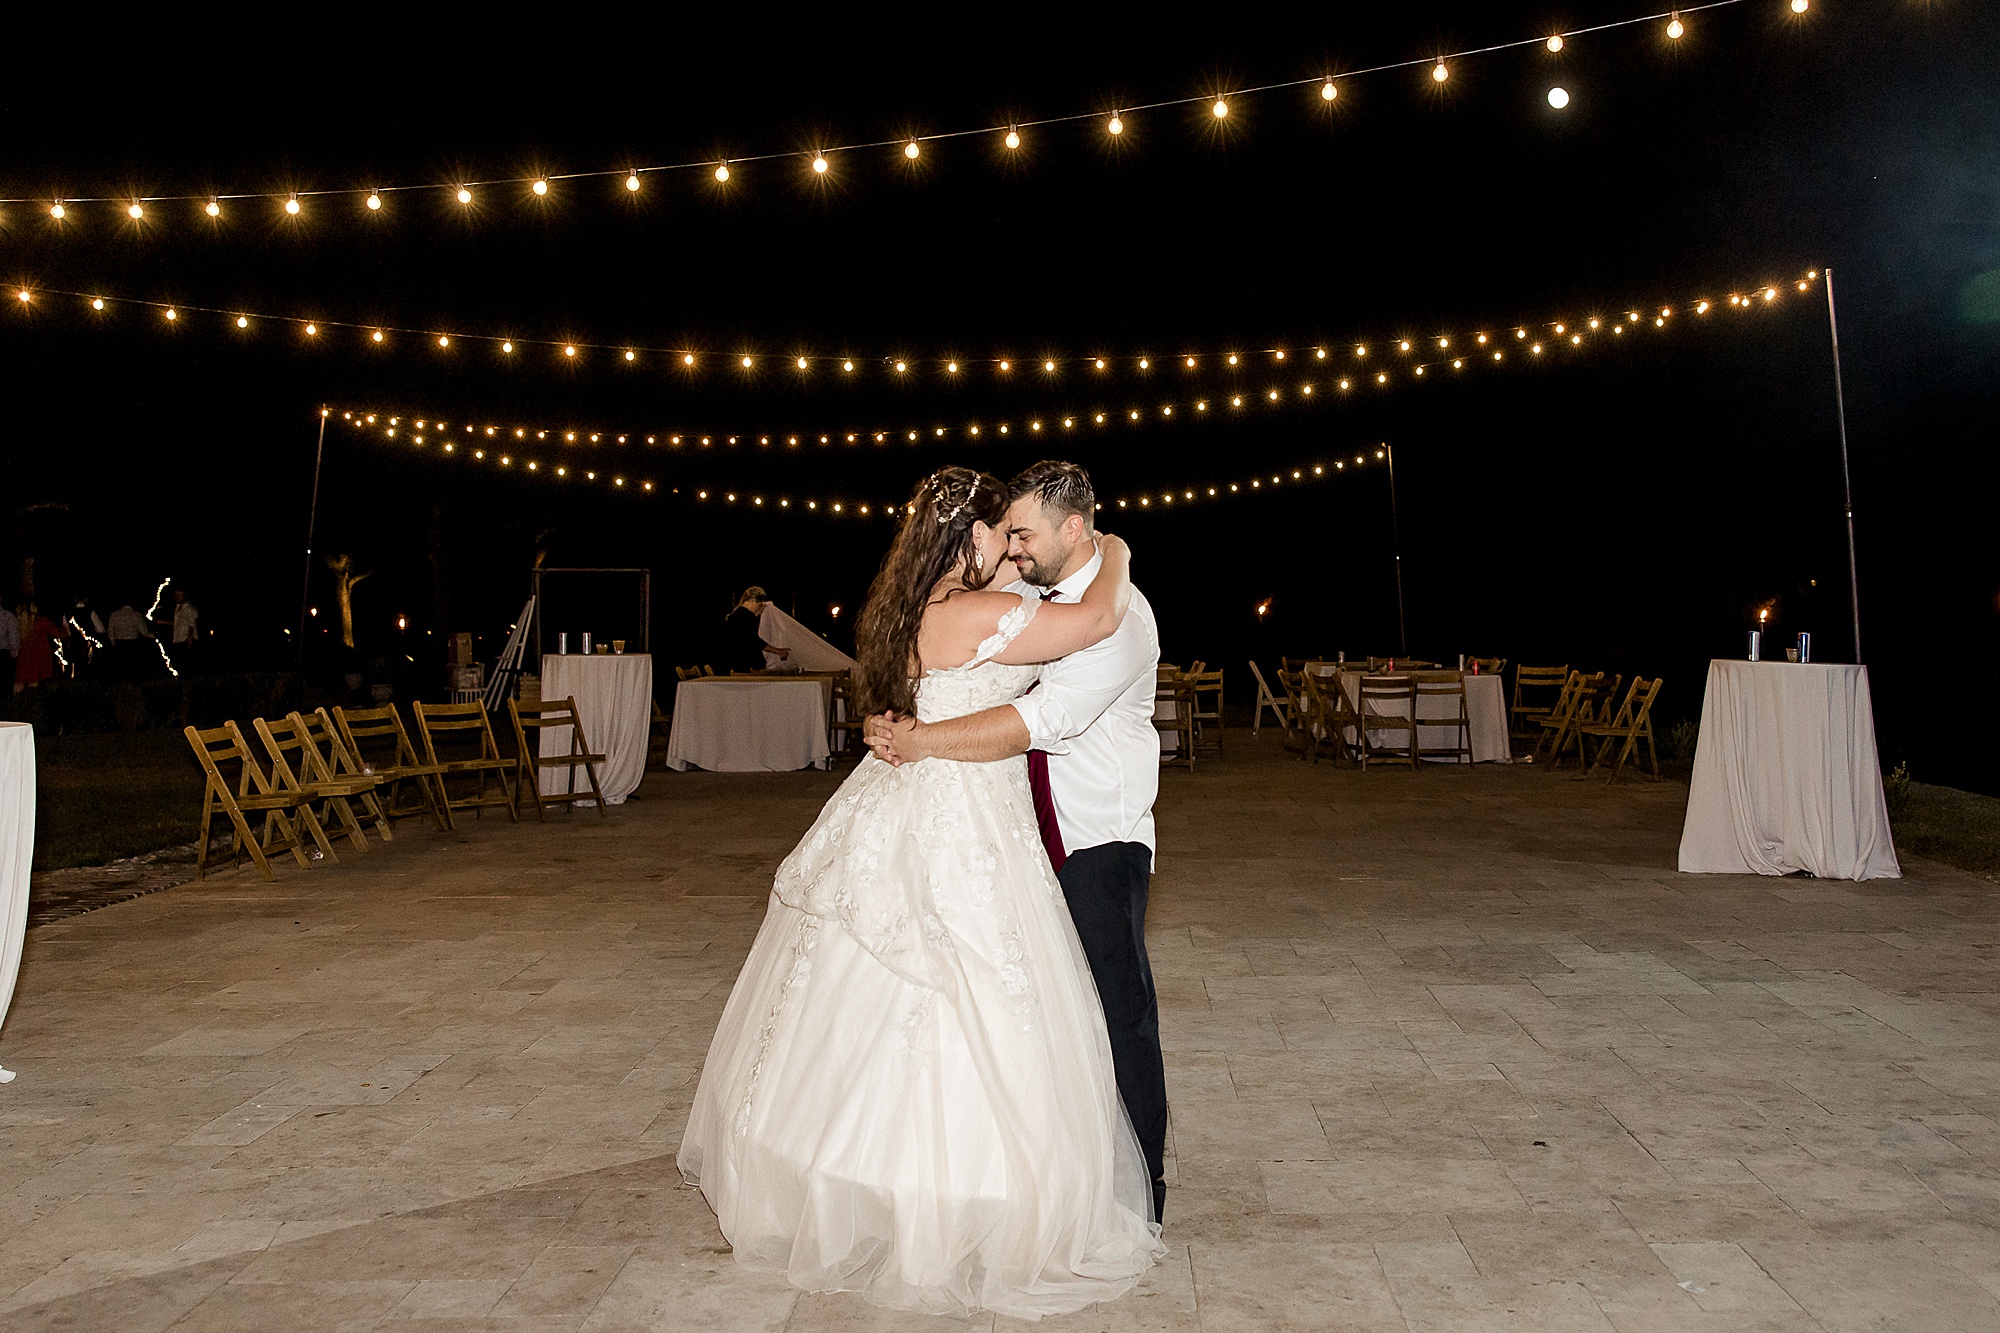 newlyweds dance together after wedding guests leave